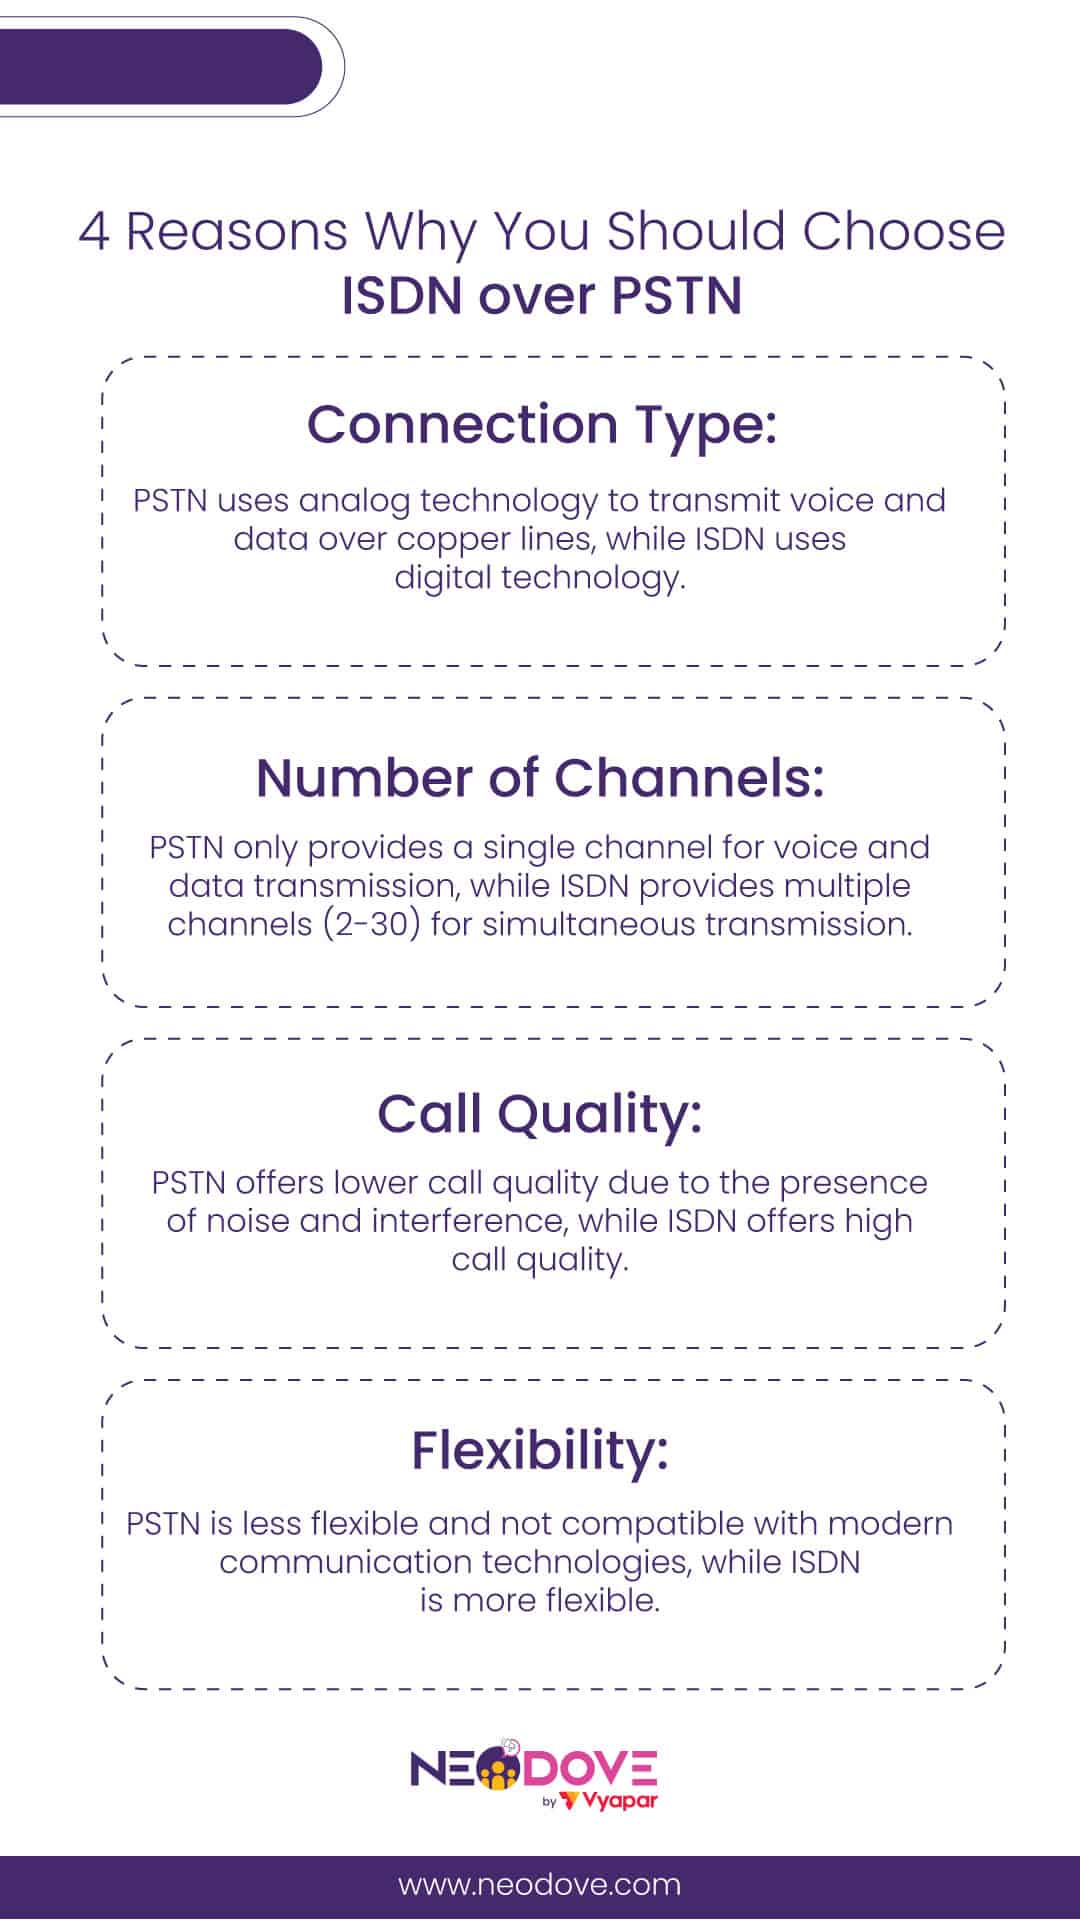 Why your business should choose ISDN over PSTN - NeoDove